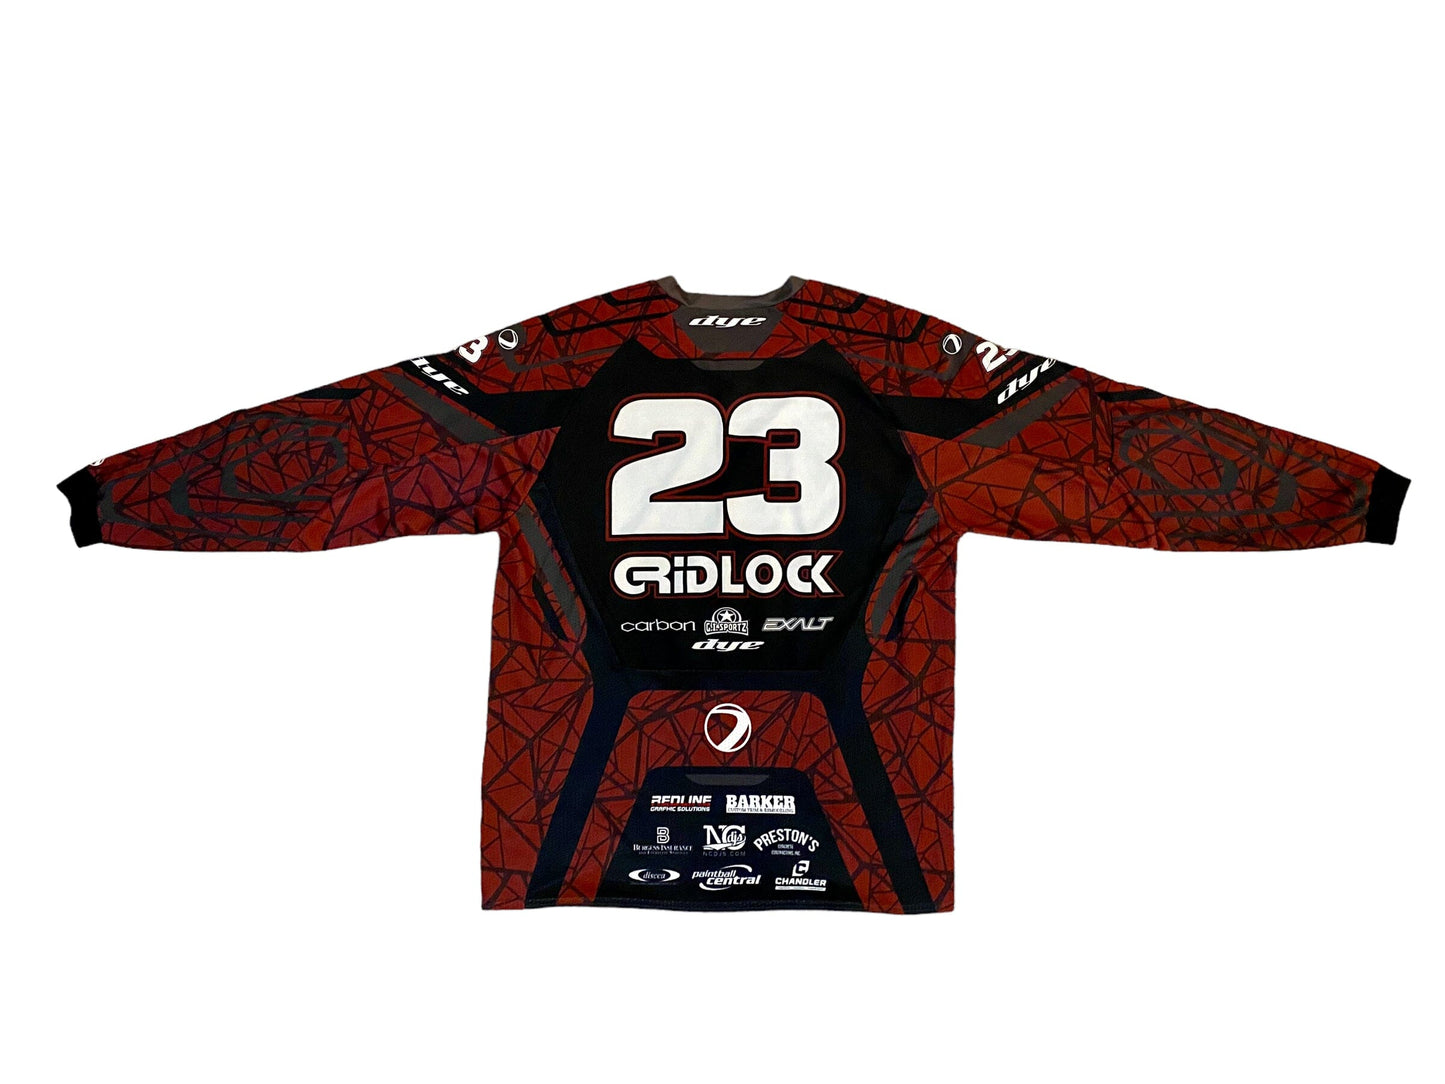 Used Dye GridLock Paintball Jersey - size XL Paintball Gun from CPXBrosPaintball Buy/Sell/Trade Paintball Markers, Paintball Hoppers, Paintball Masks, and Hormesis Headbands